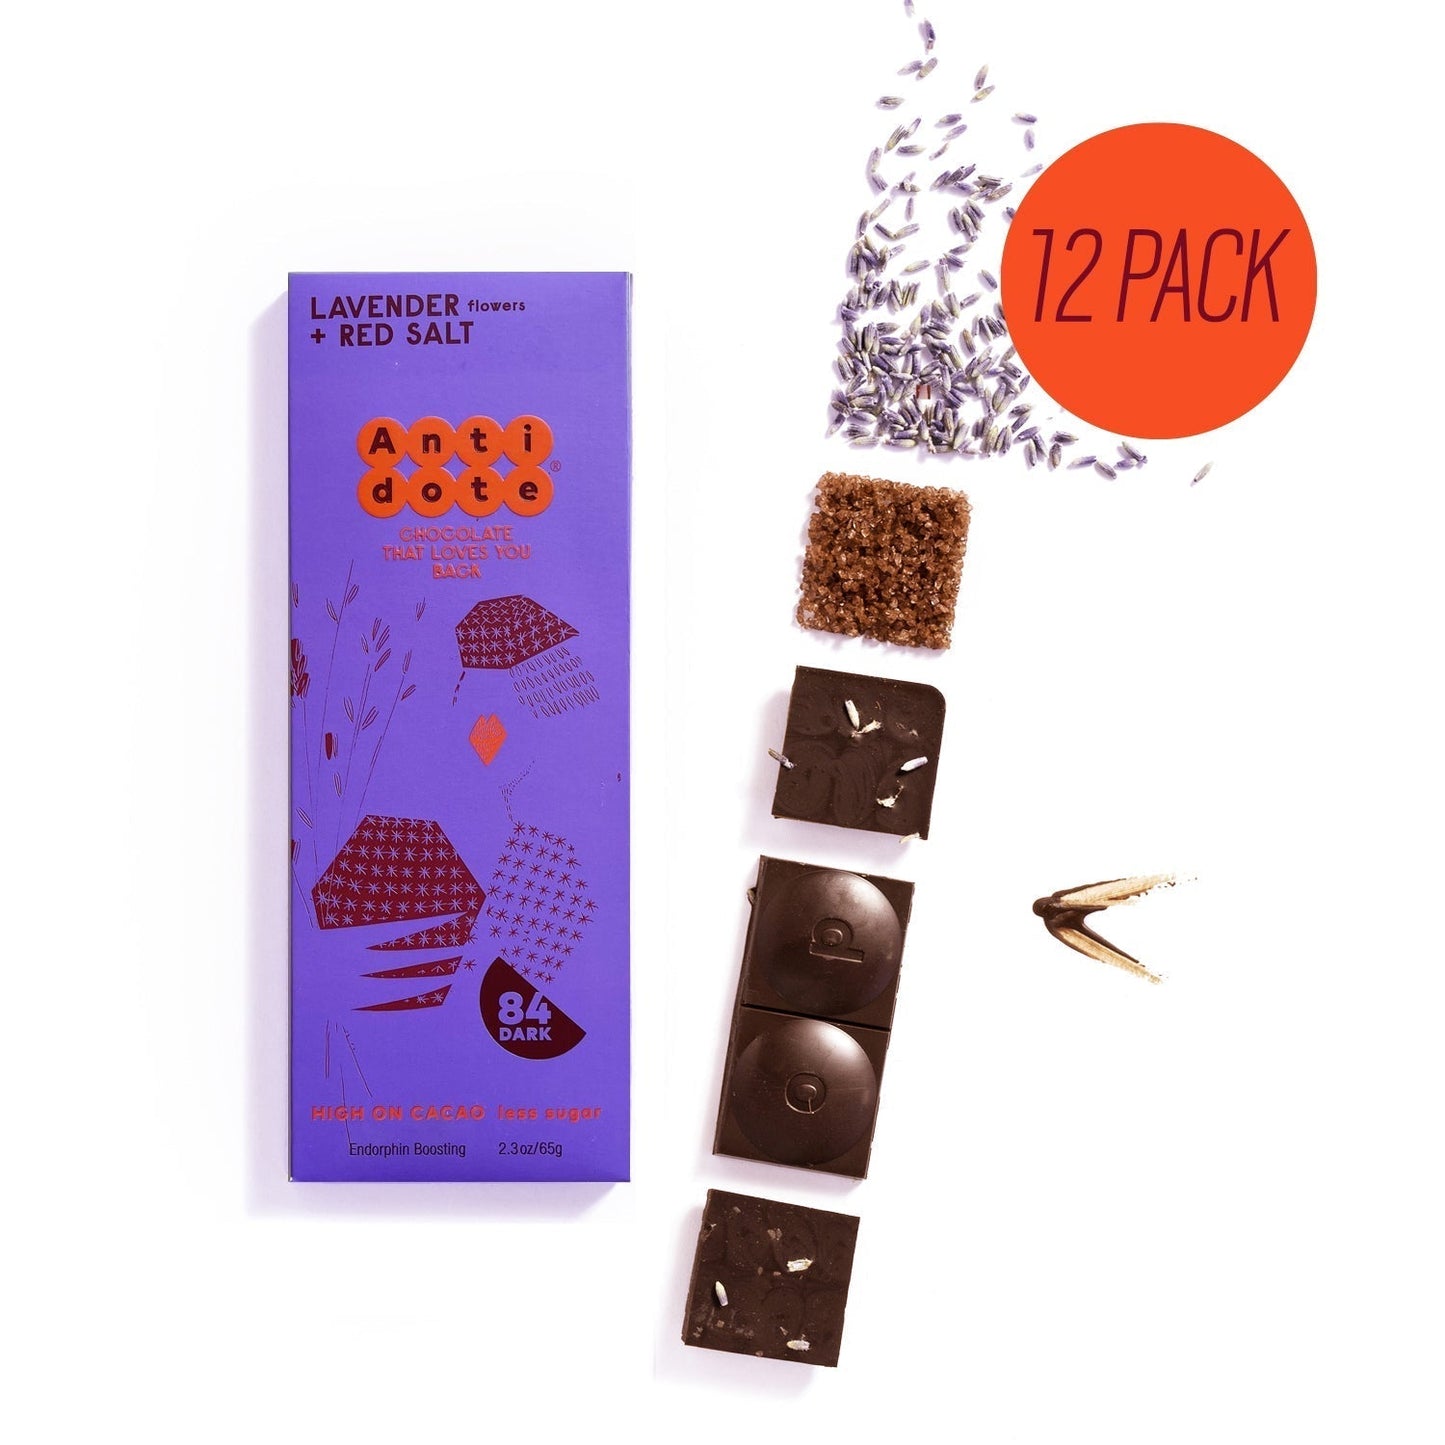 Antidote Chocolate PANAKEIA: LAVENDER + RED SALT Cases - 3 cases x 12 bars